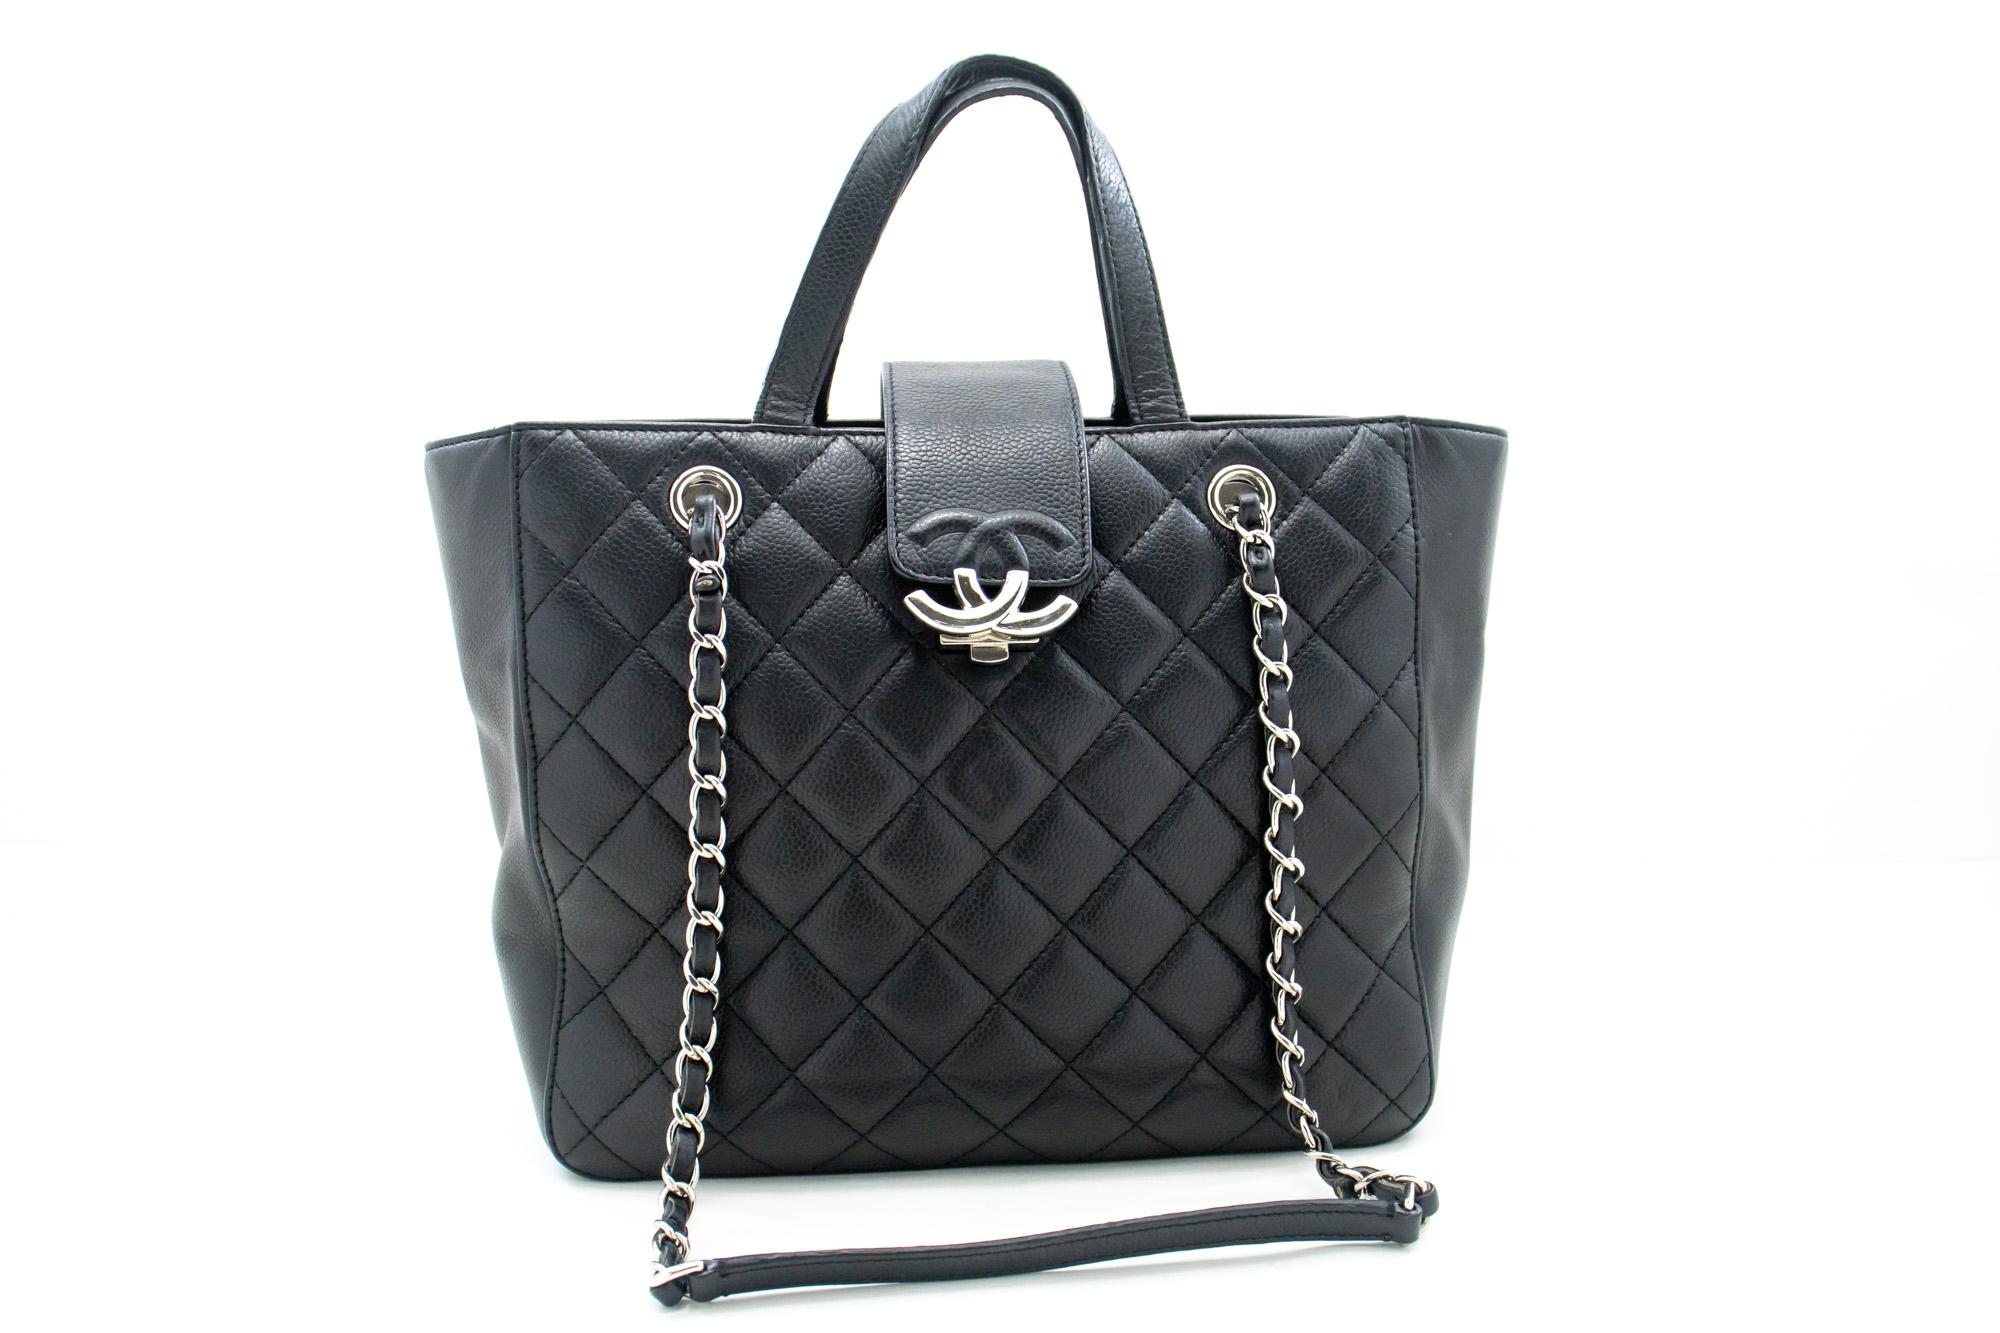 An authentic CHANEL 2 Way Chain Shoulder Bag Handbag Tote Black Caviar Quilted. The color is Black. The outside material is Leather. The pattern is Solid. This item is Contemporary. The year of manufacture would be 2016.
Conditions & Ratings
Outside